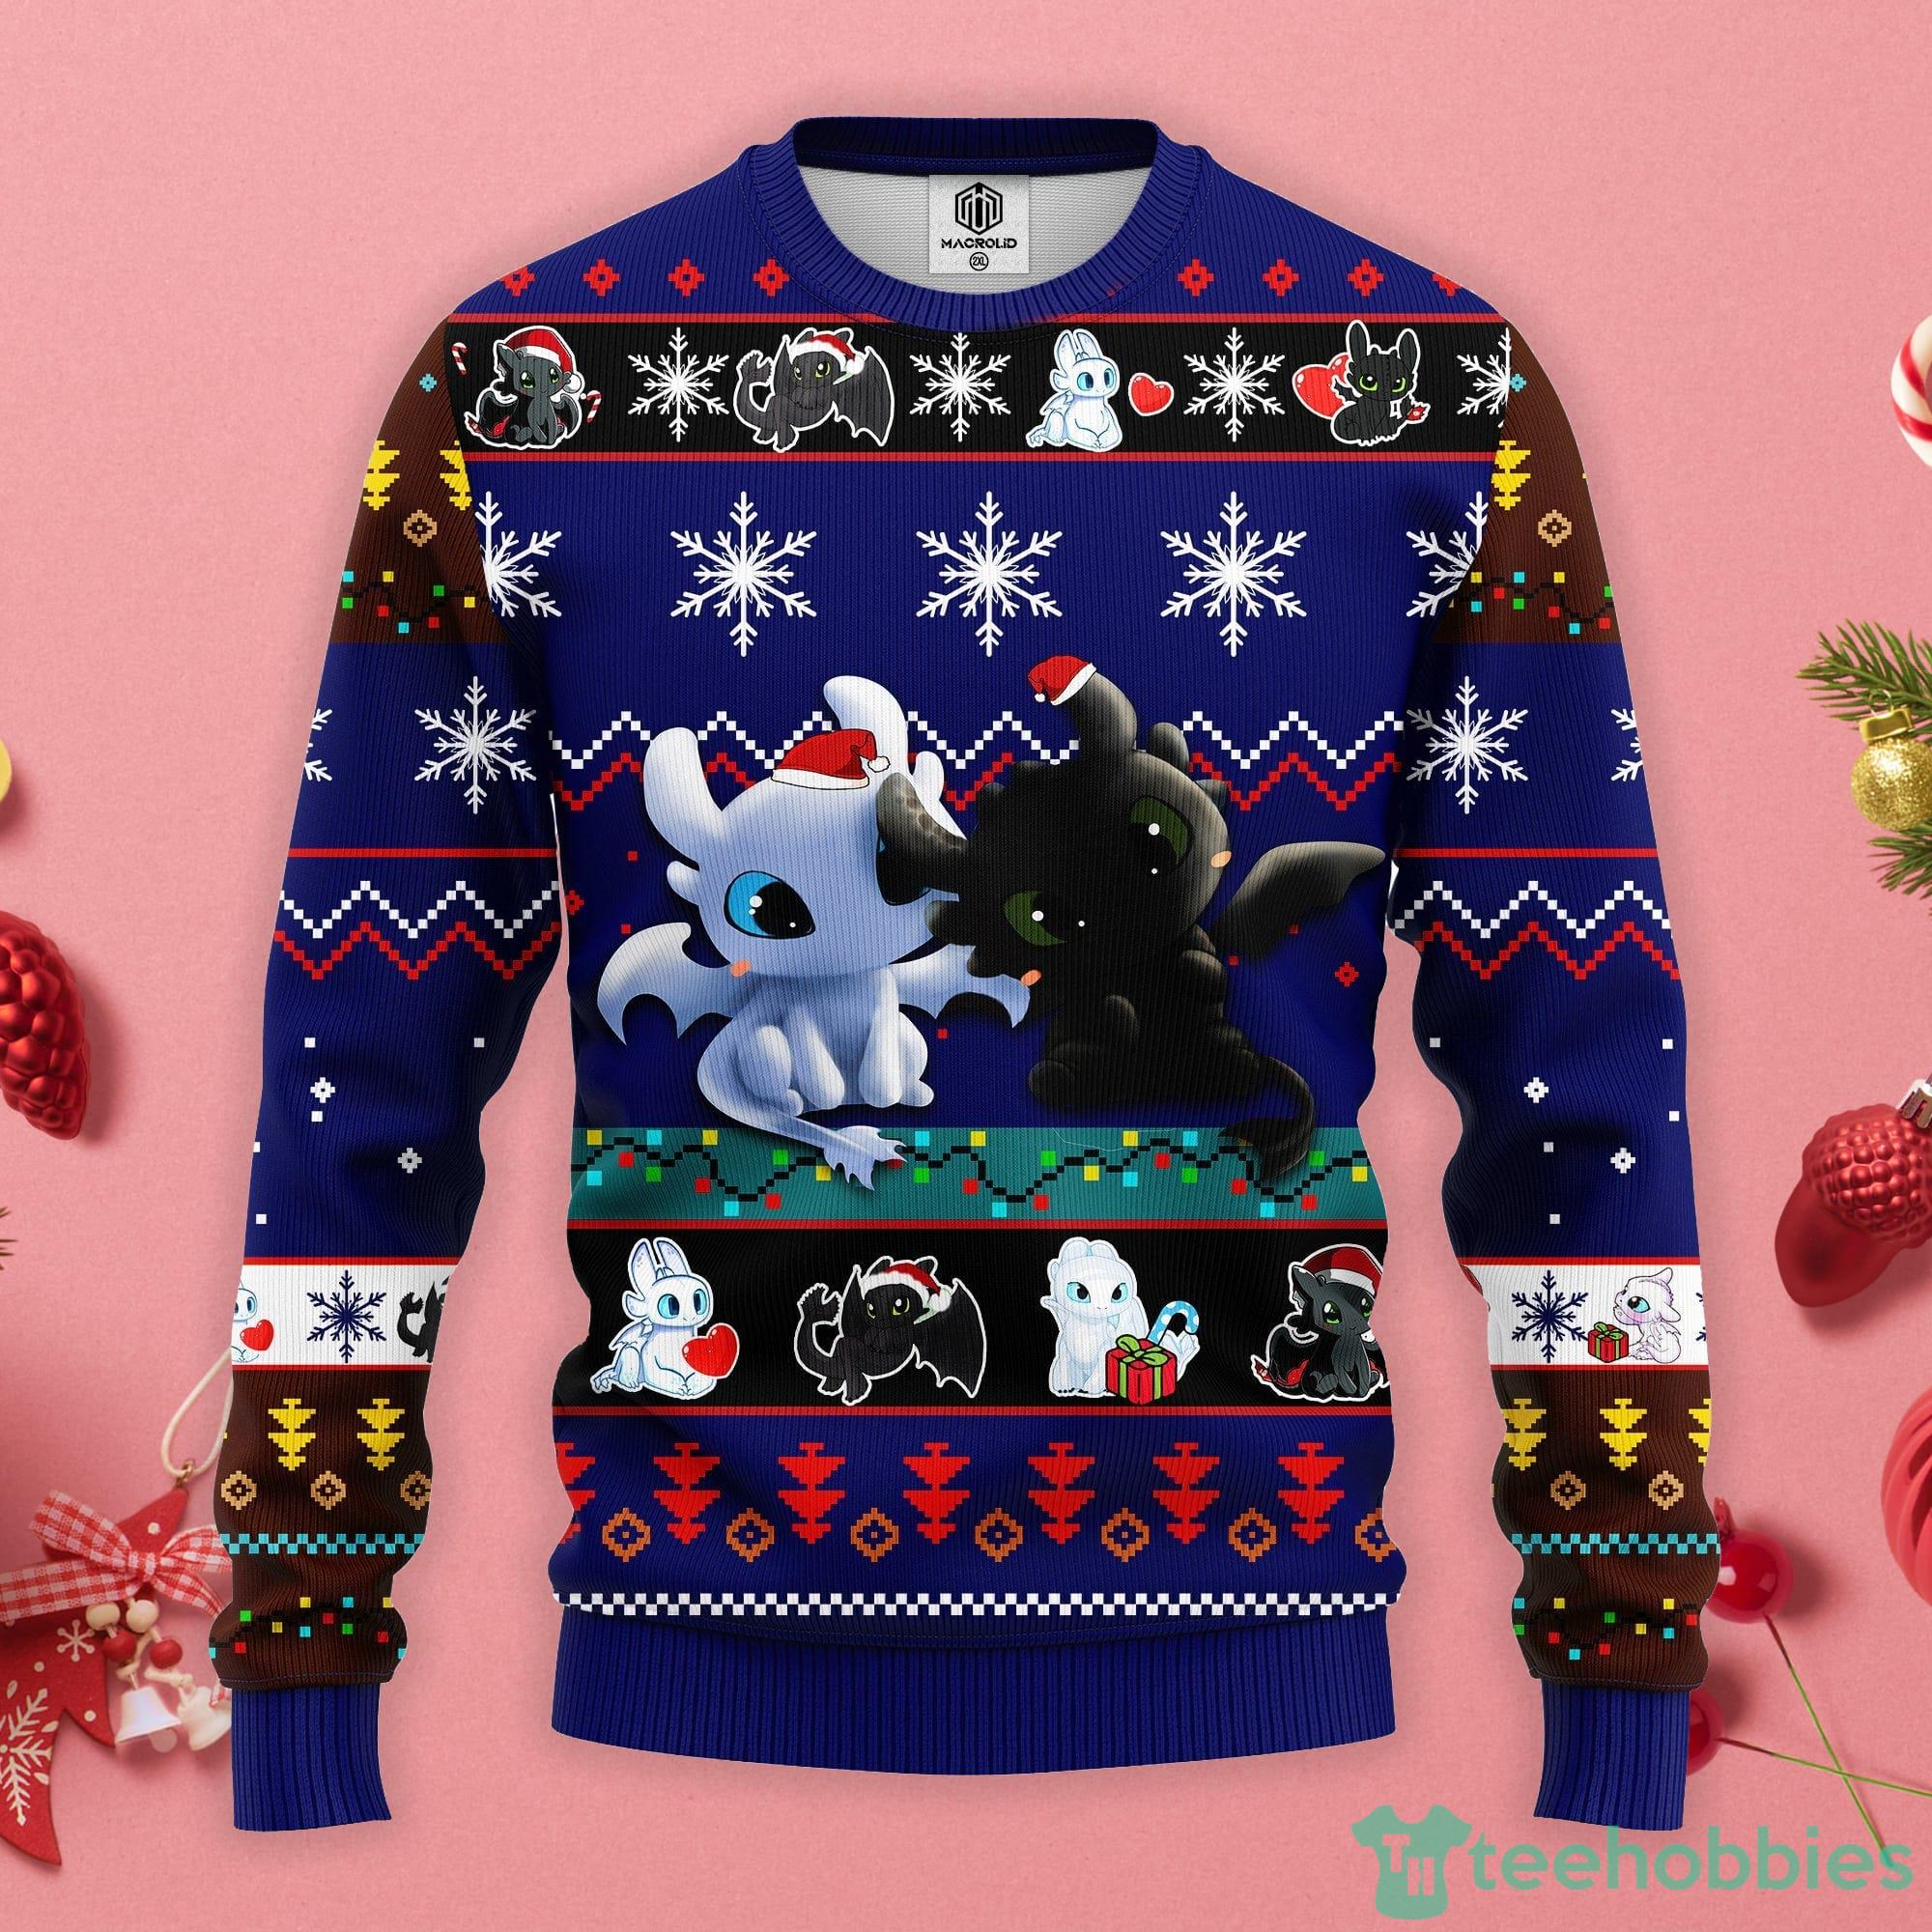 How To Train Your Dragon Toothless Love Christmas Gift Ugly Christmas Sweater Product Photo 1